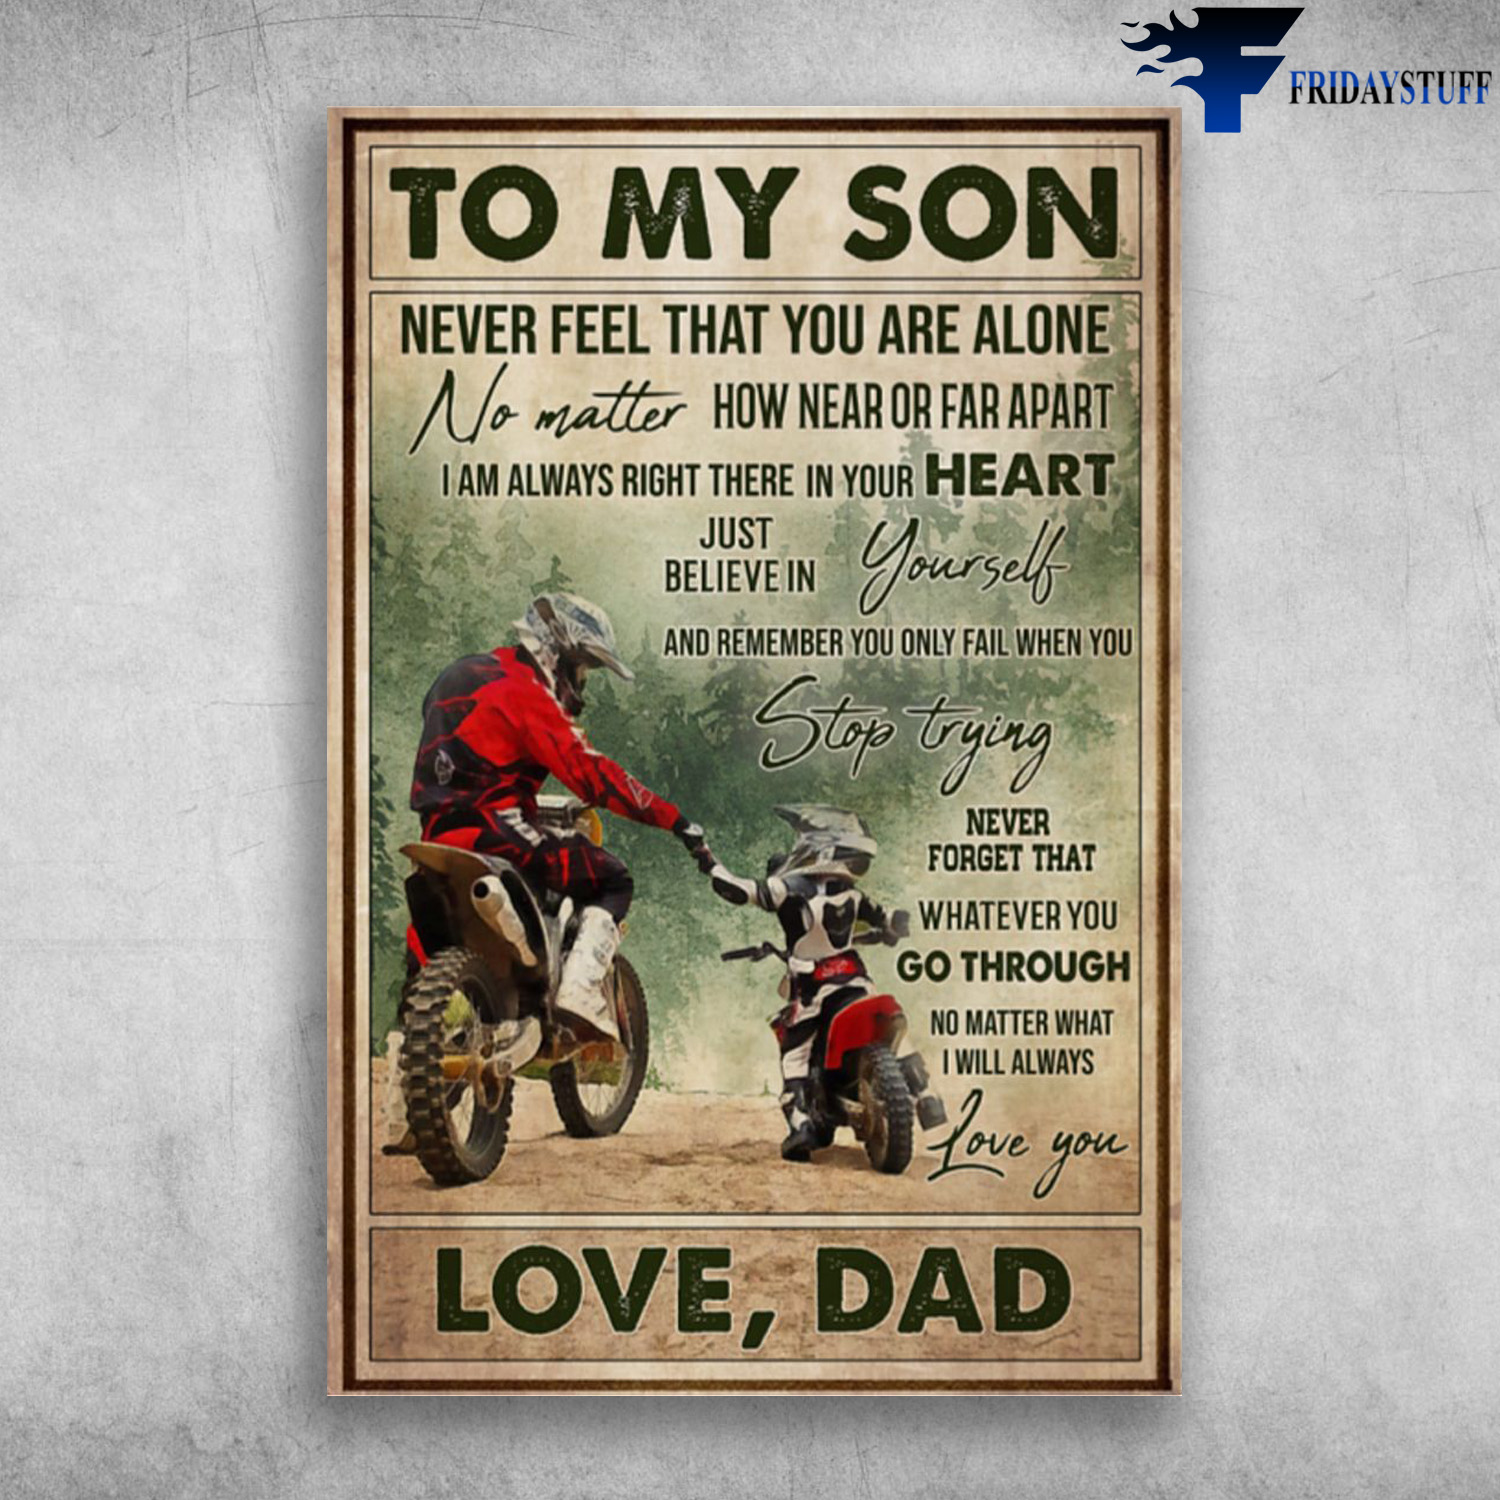 Dad And Son Drive Motocross - To My Son, Never Feel That You Are Alone